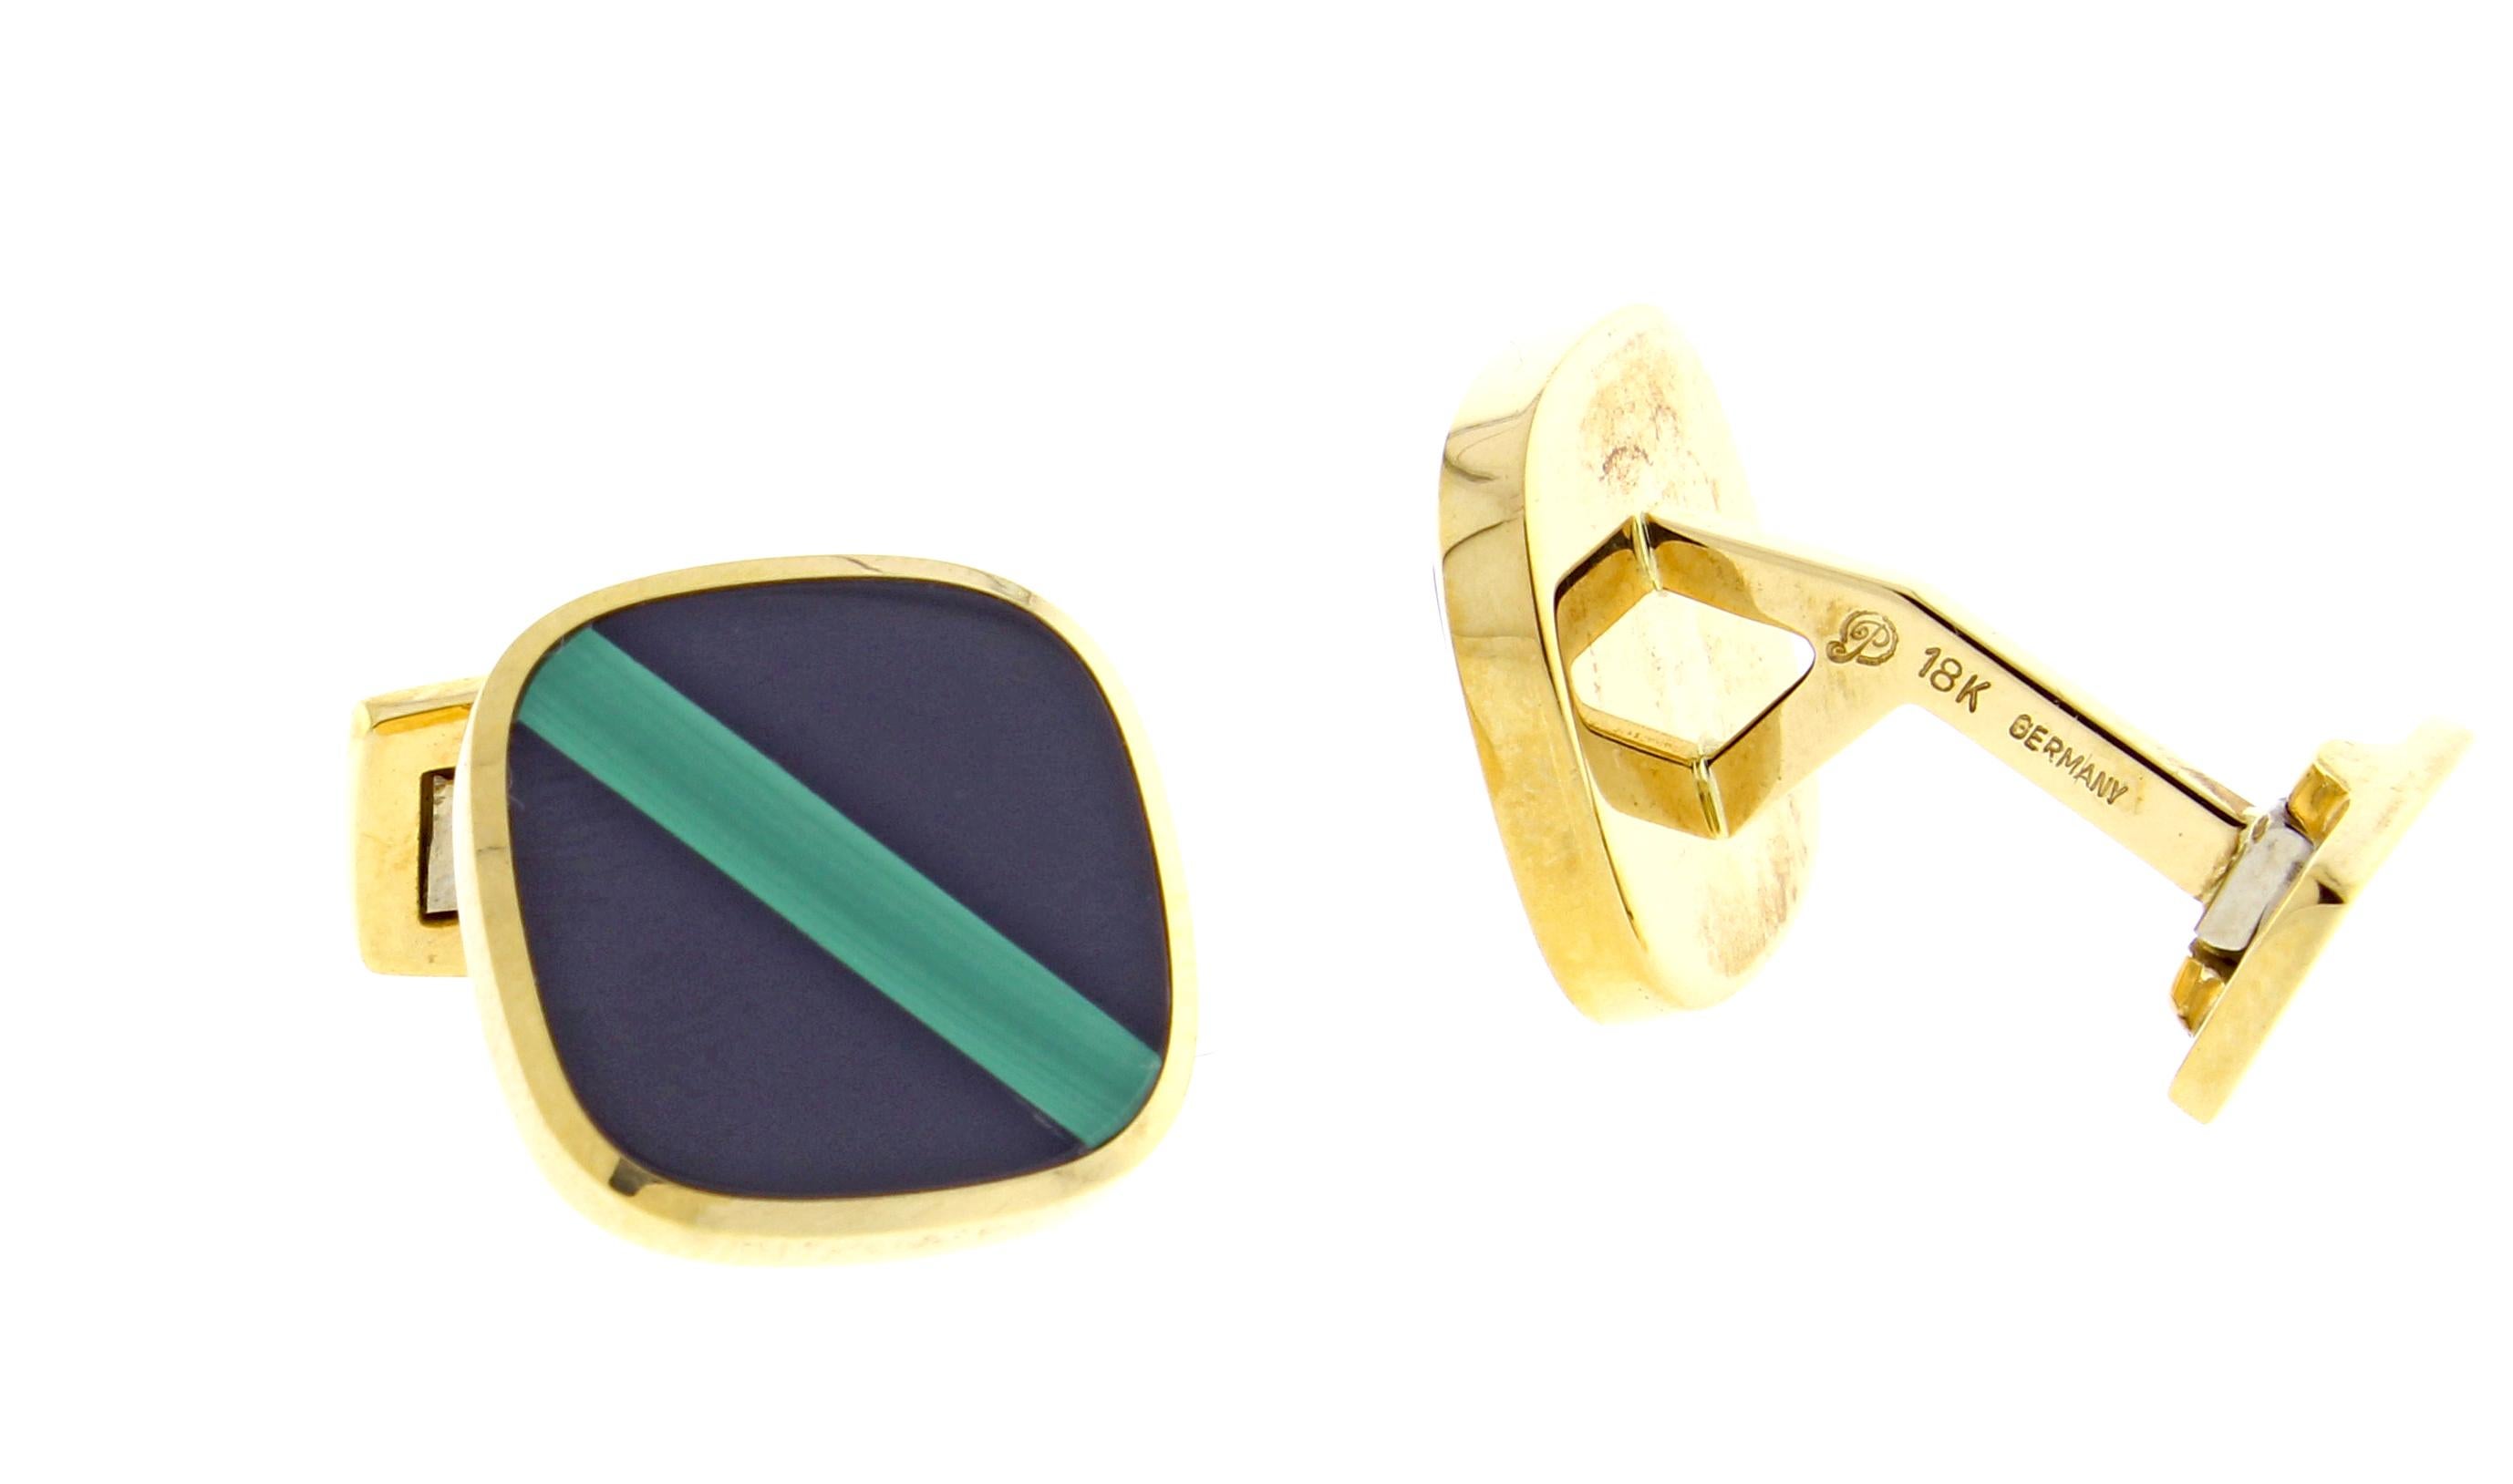 From Pampillonia jewelers, a pair of black onyx and malachite 18 karat gold cufflinks. The wing back cufflinks feature a stripe of malachite with two sections of black onyx on are meticulously crafted in Germany for Pampillonia jewelers. 17mm square